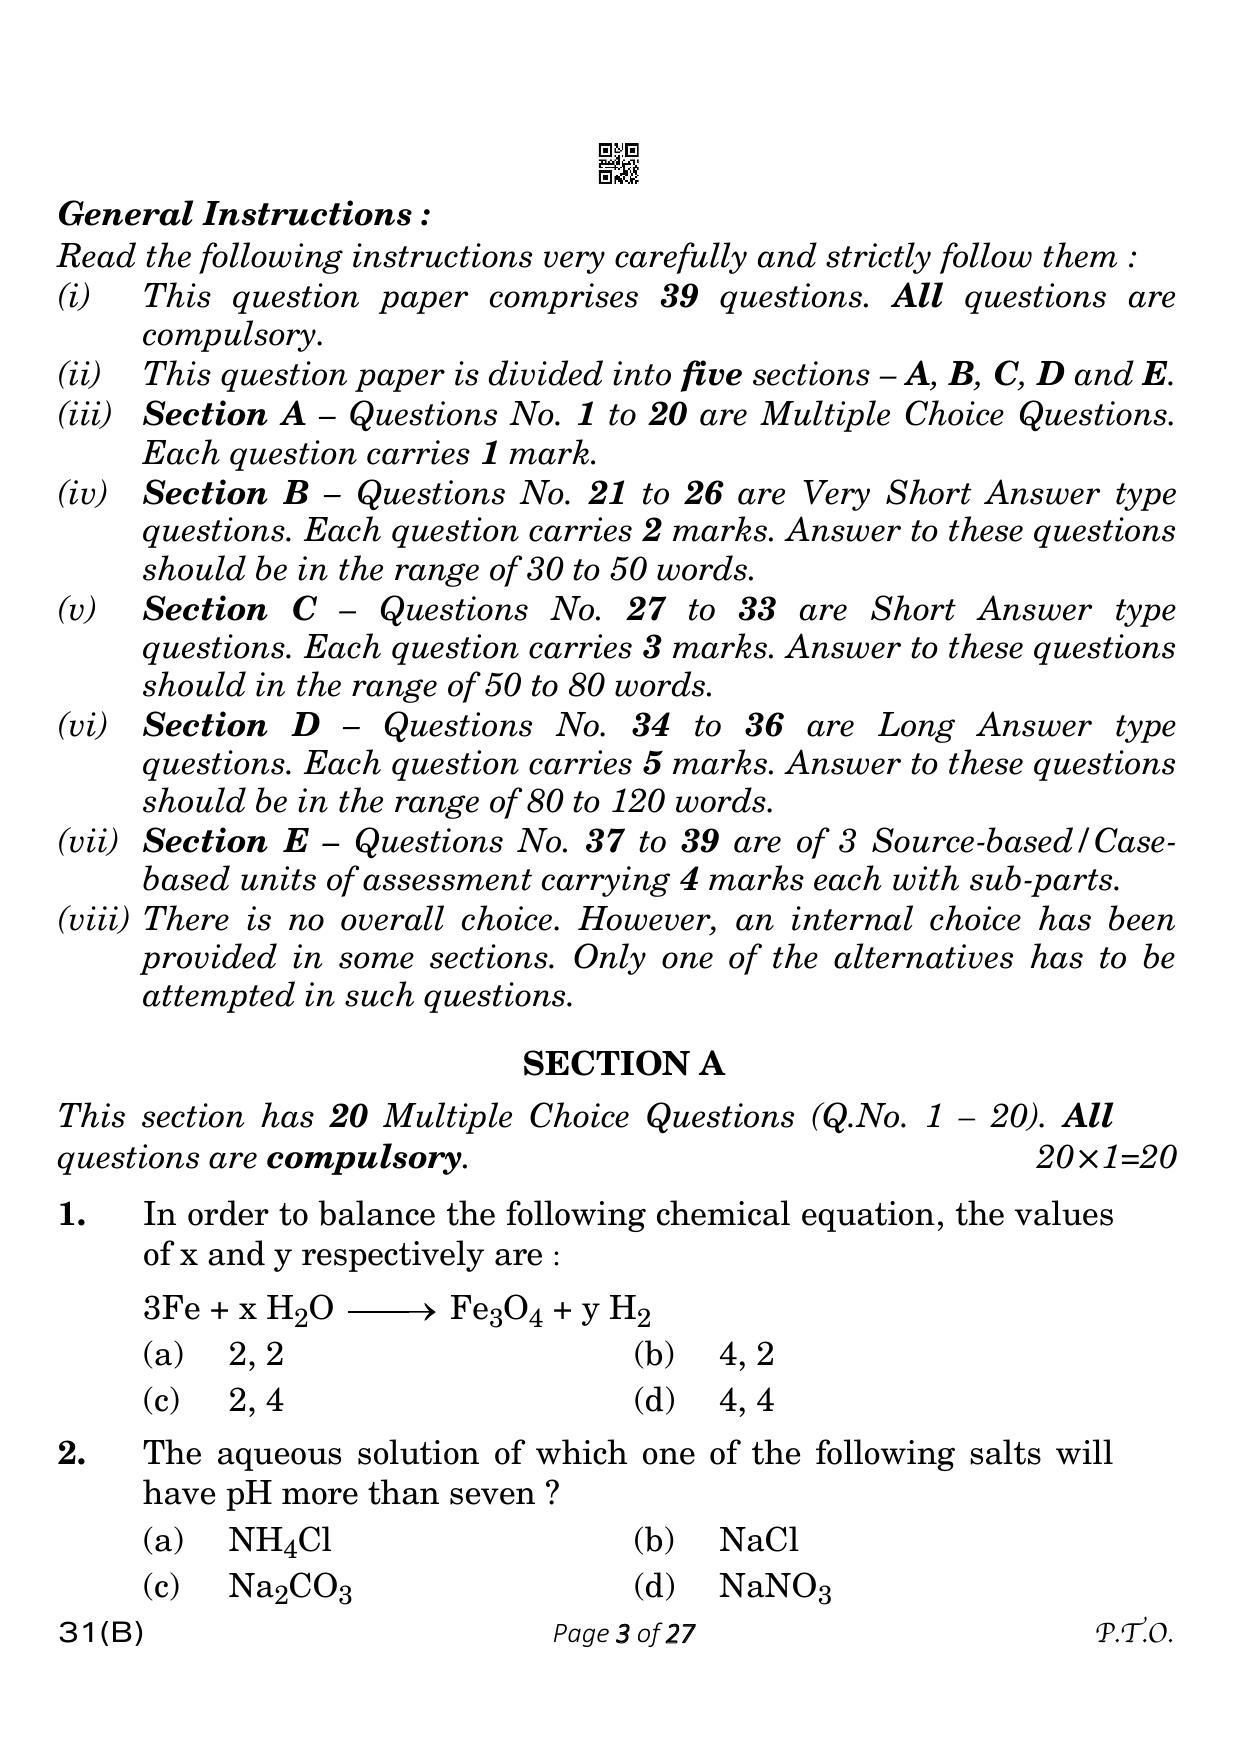 CBSE Class 10 31-B Science 2023 (Compartment) Question Paper - Page 3